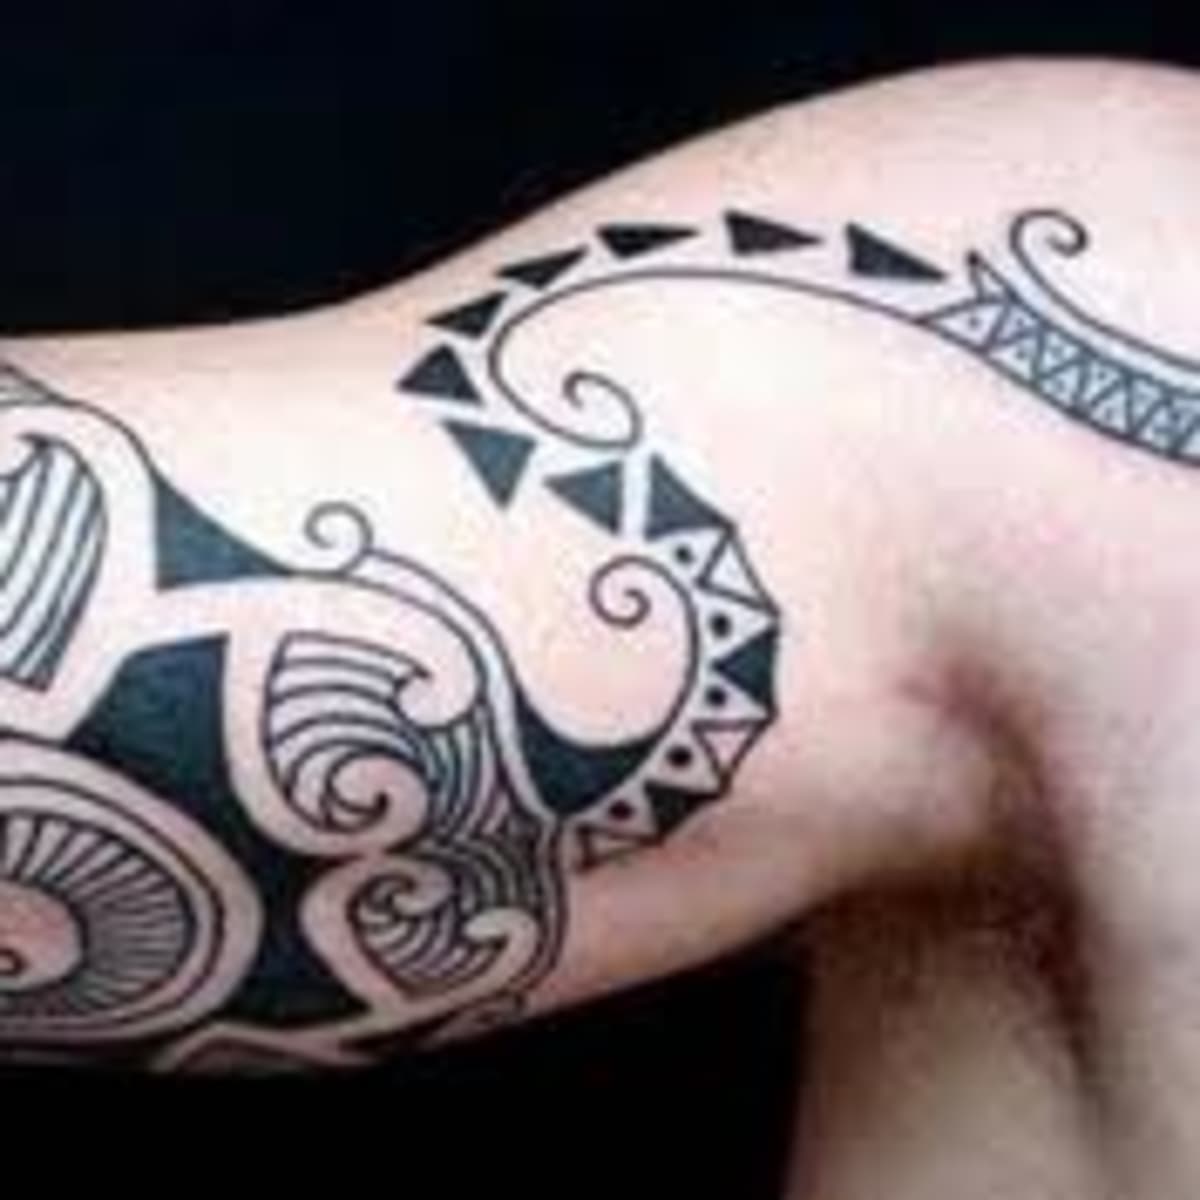 Maori Tattoos And Meanings-Maori History And Tattoo Designs - HubPages